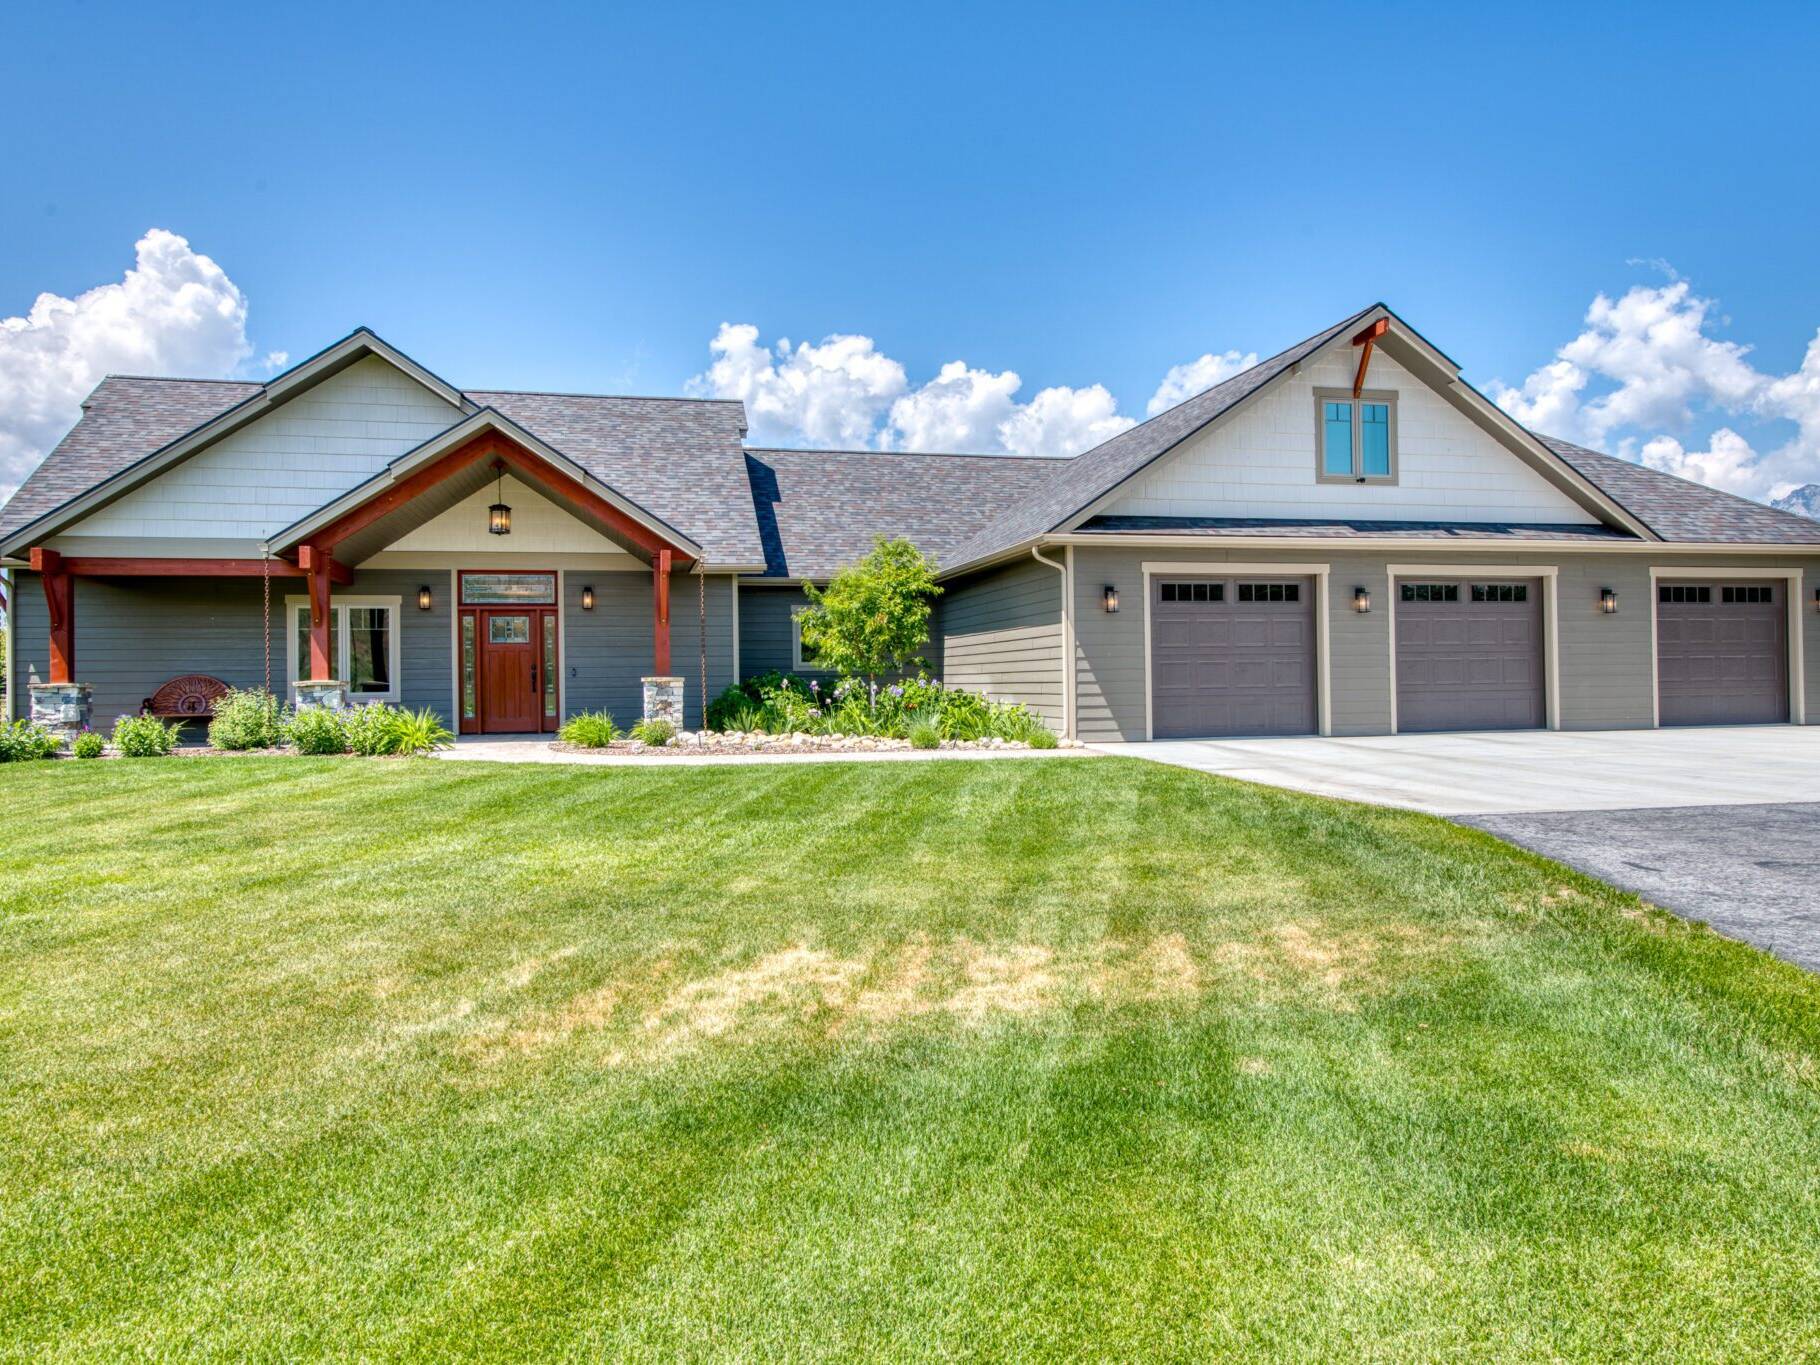 House exterior with a covered front porch with exposed beams in a custom home by Big Sky Builders in Hamilton, MT.